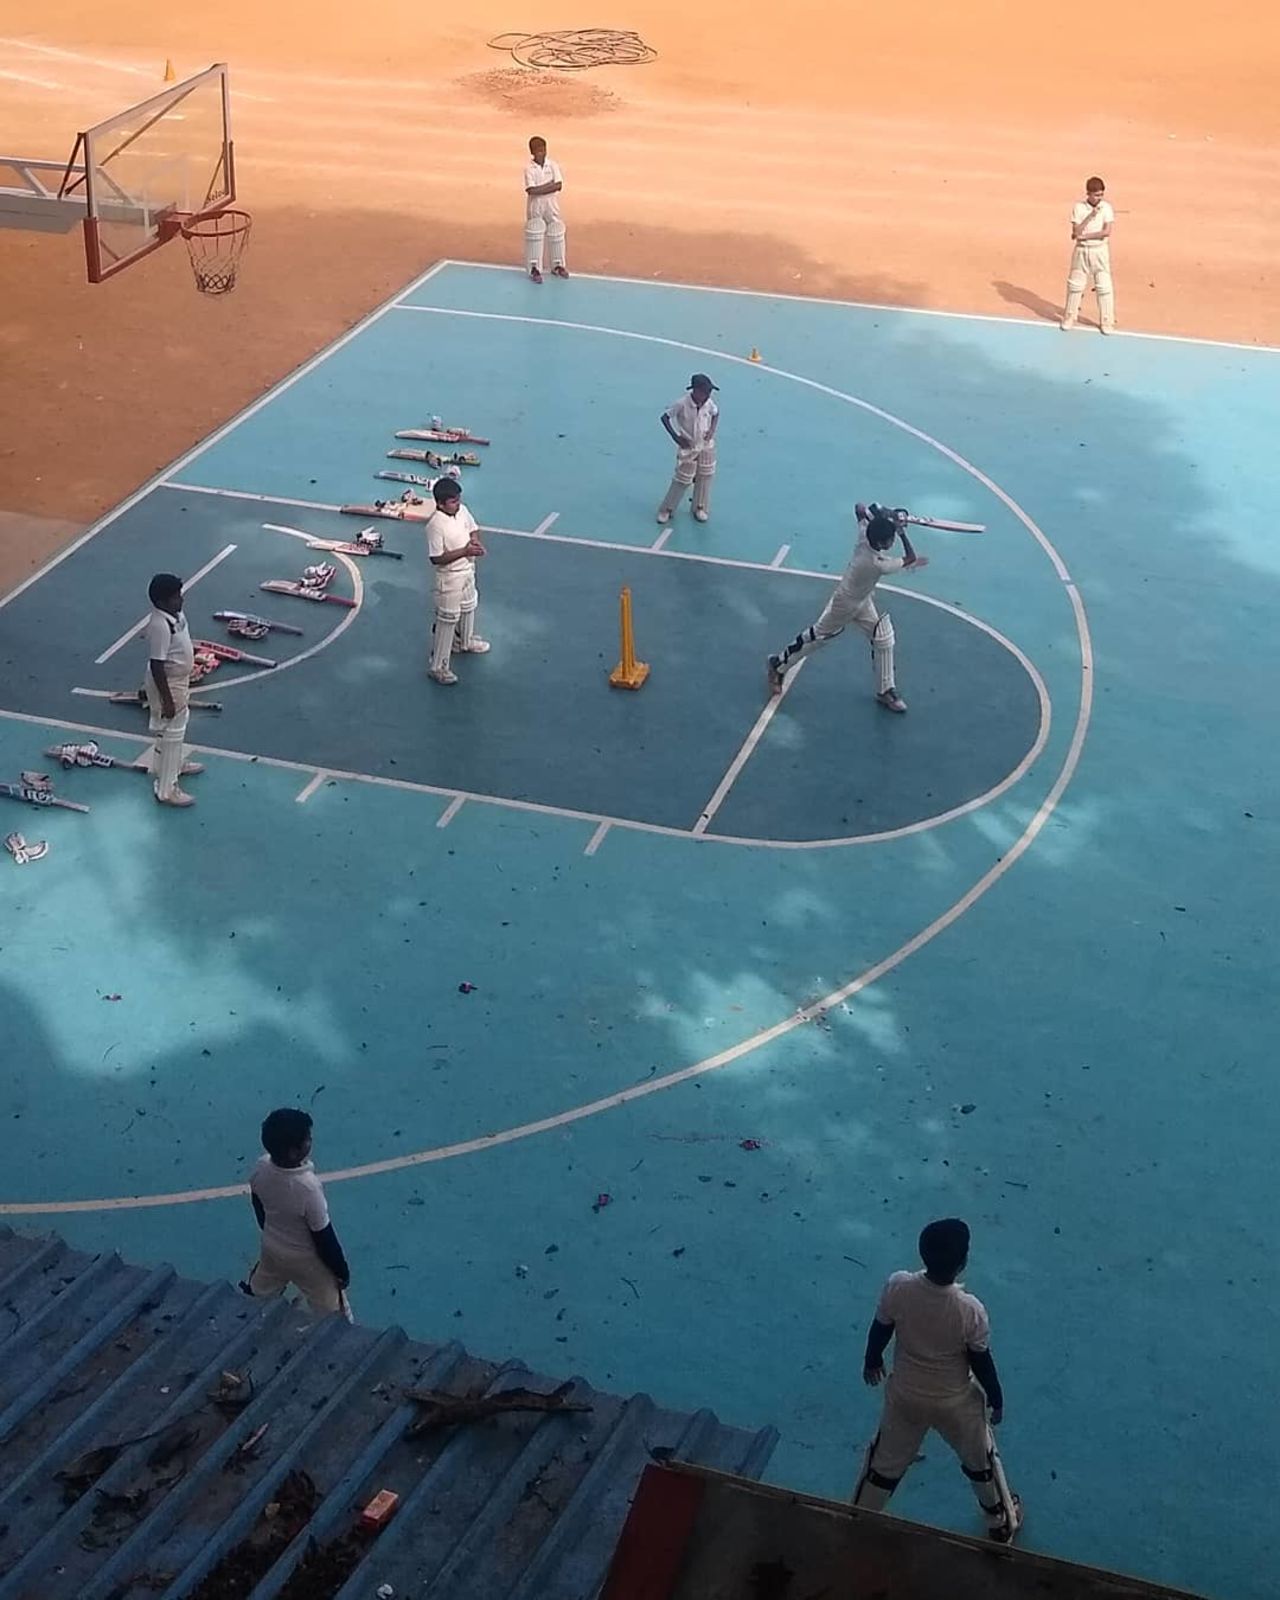 Karthik Krishnaswamy: 'Elbow straight, head still, played in the V'<br>
<br>
A boy demonstrates good technique in the basketball court at Bengaluru's Frank Anthony Public school 